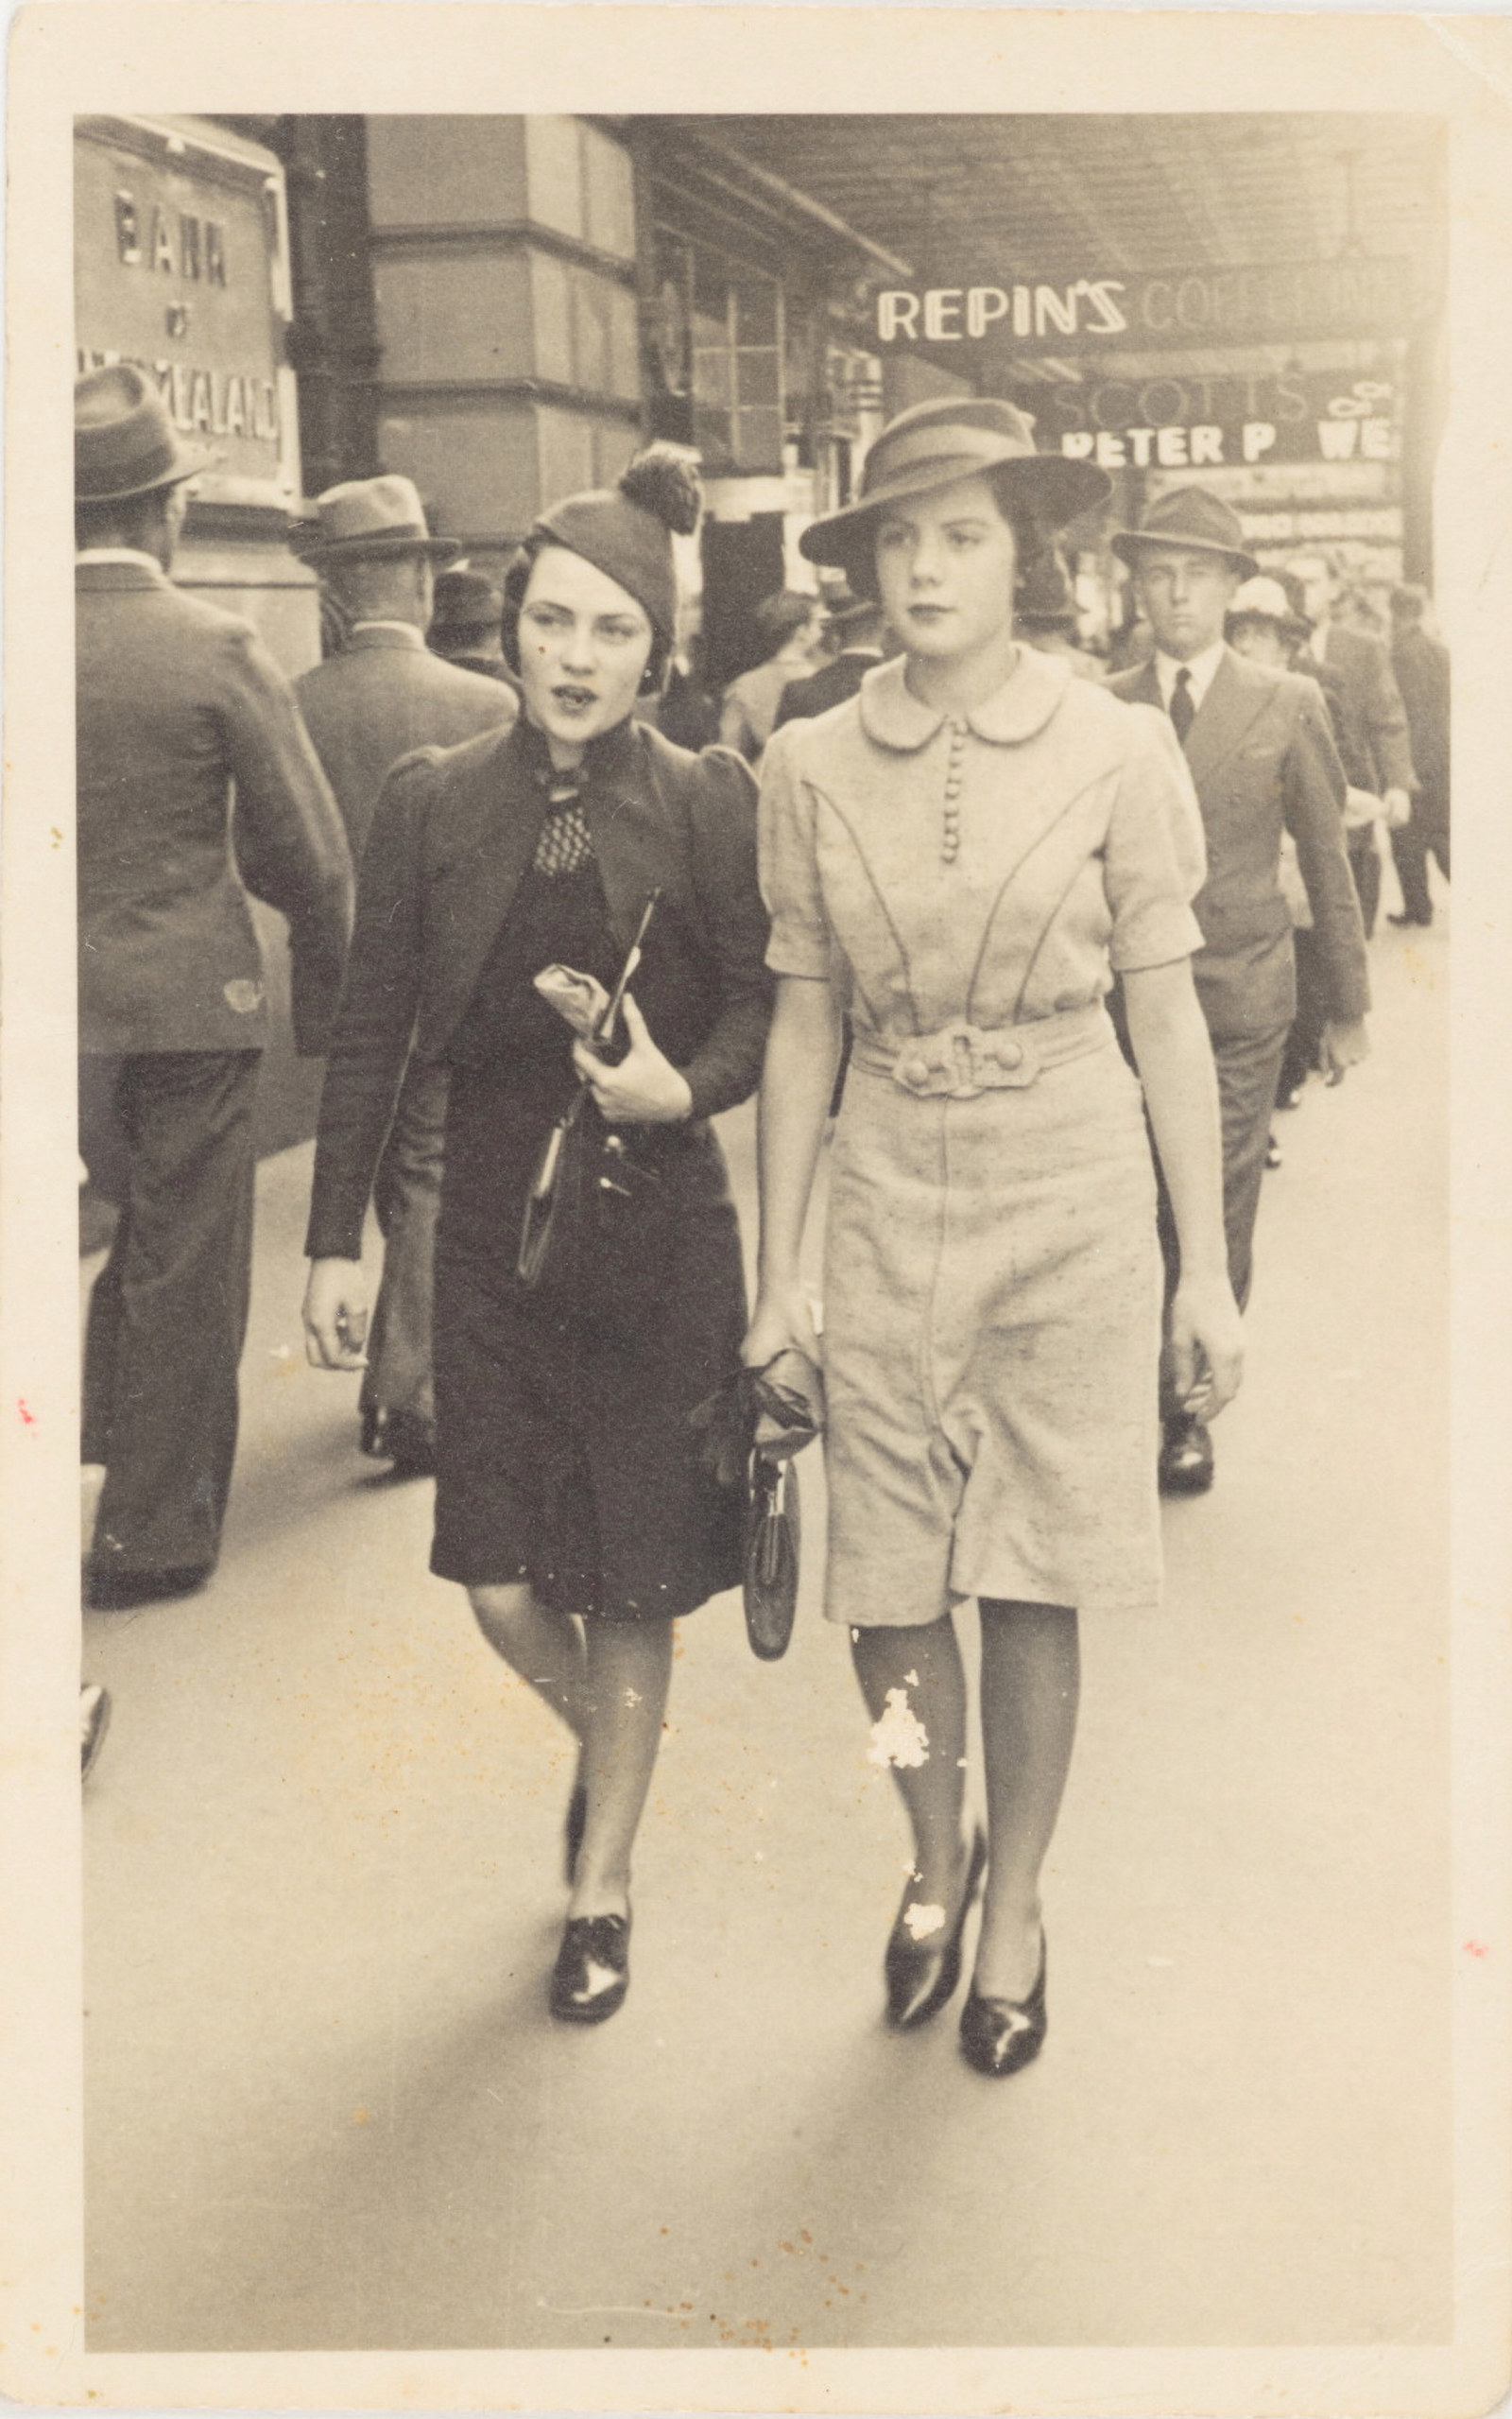 Sepia toned black and white photo of two women in hats walking down street.